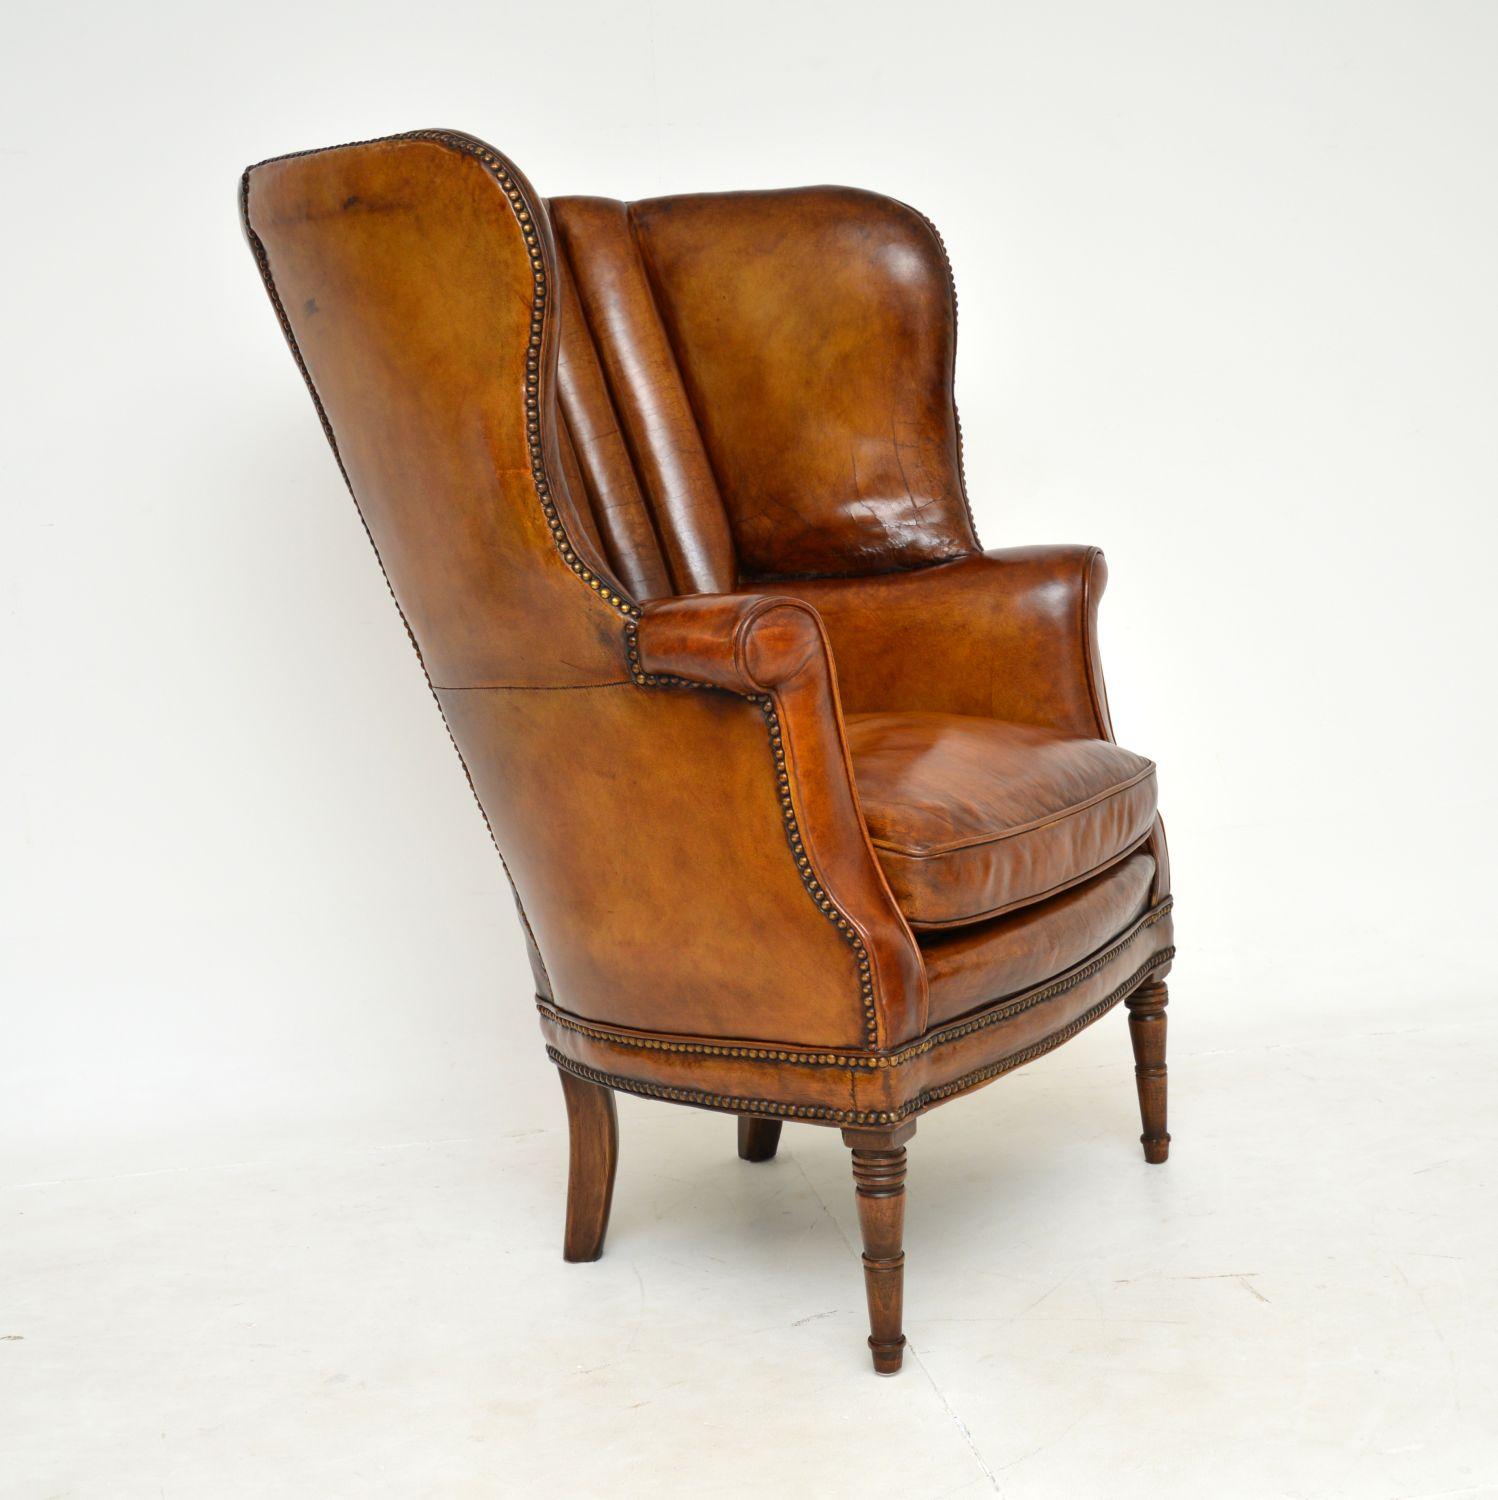 British Antique George III Barrel Back Leather Wing Armchair